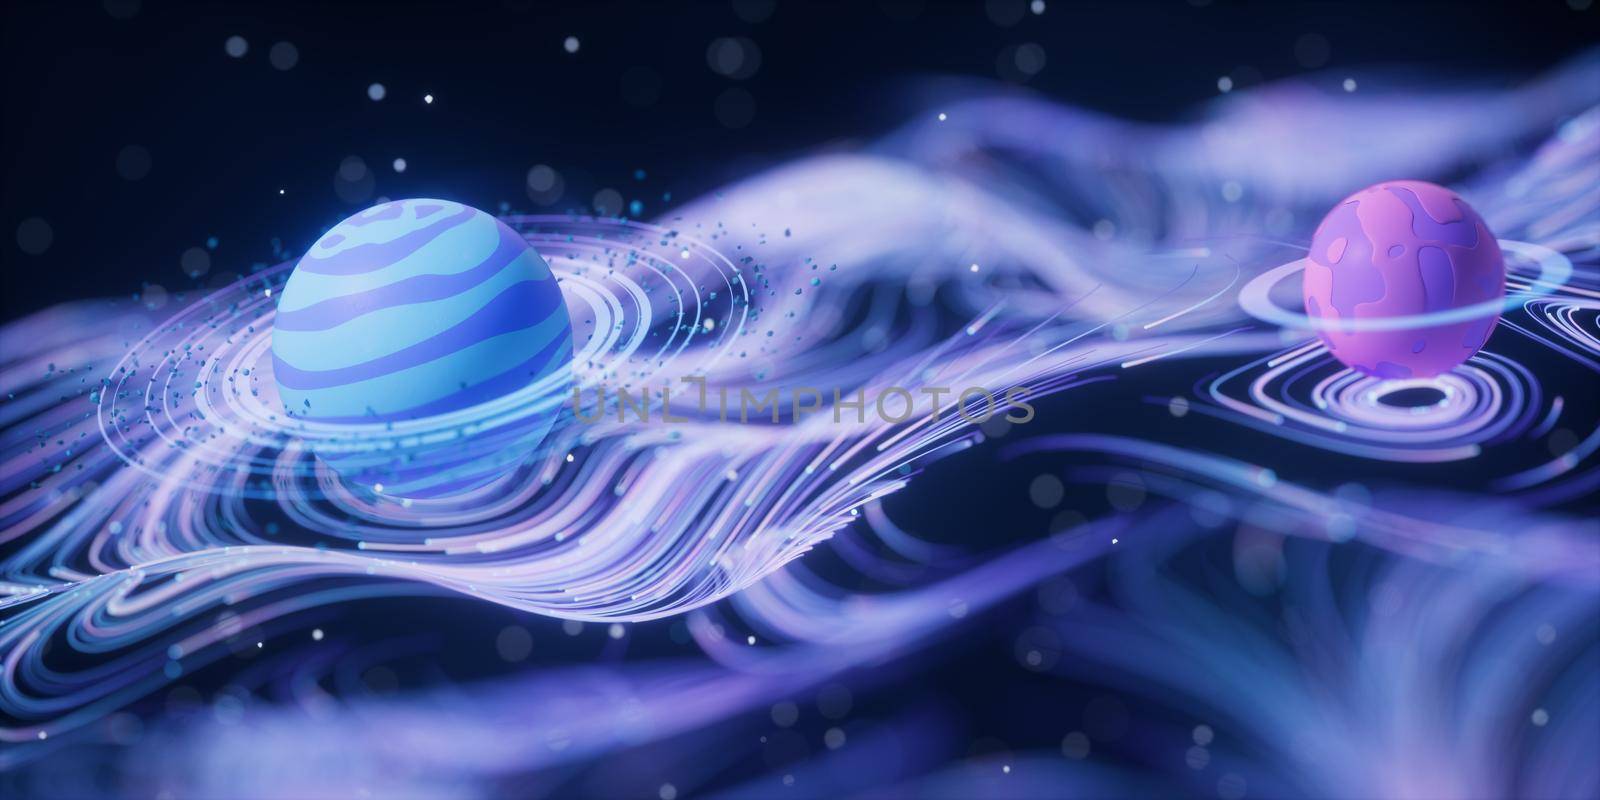 Outer space planet with wave pattern background, 3d rendering. by vinkfan